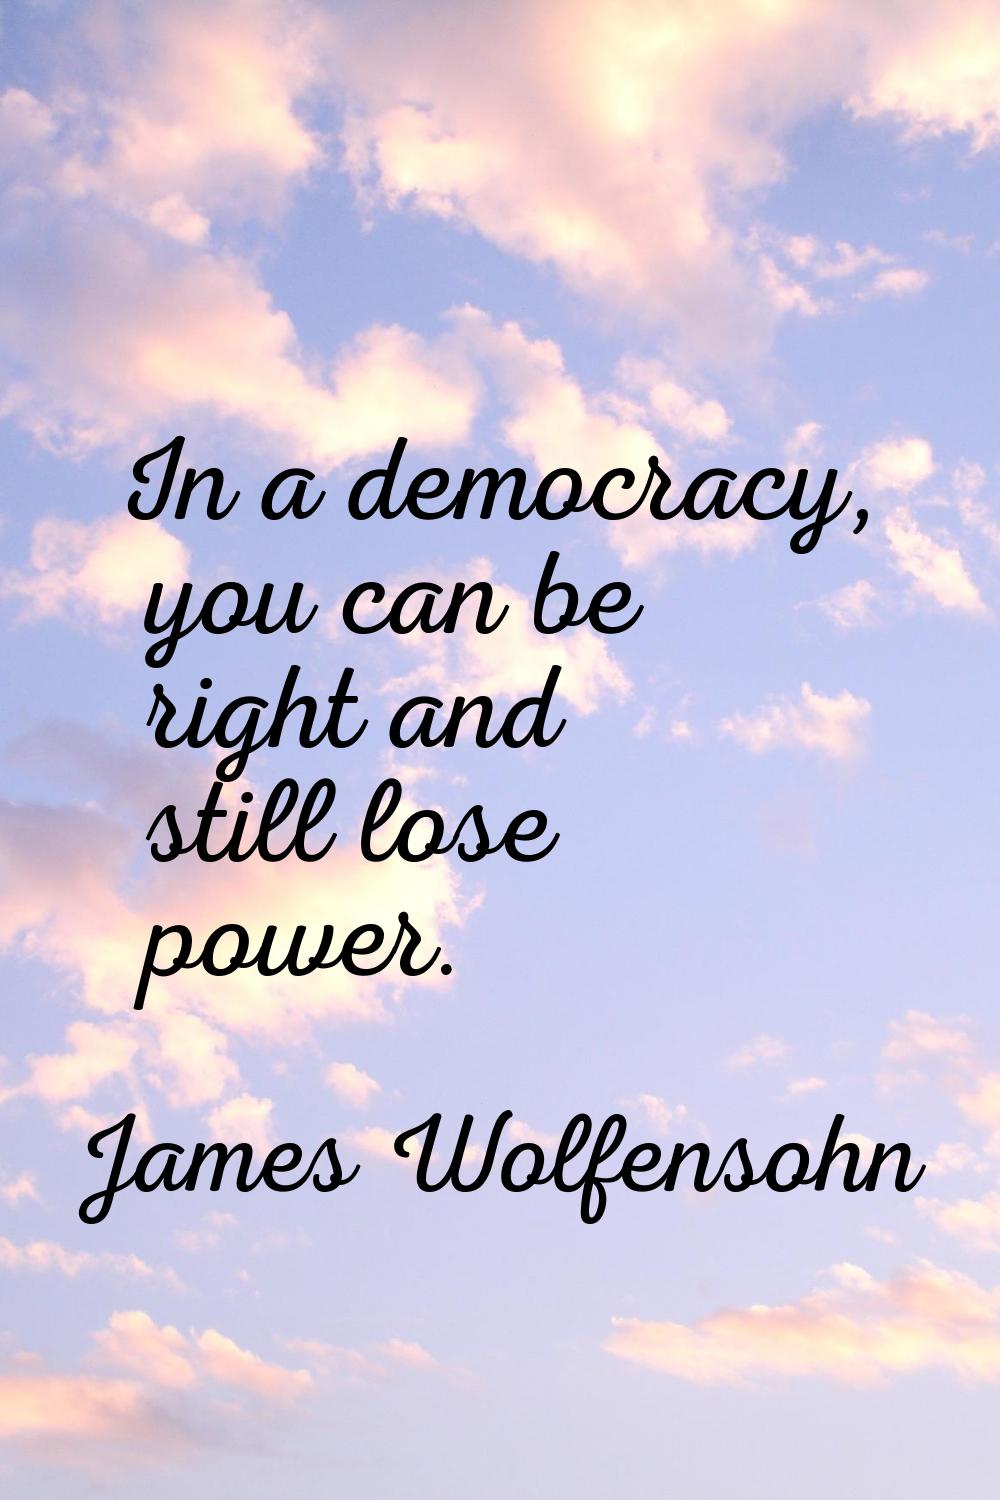 In a democracy, you can be right and still lose power.